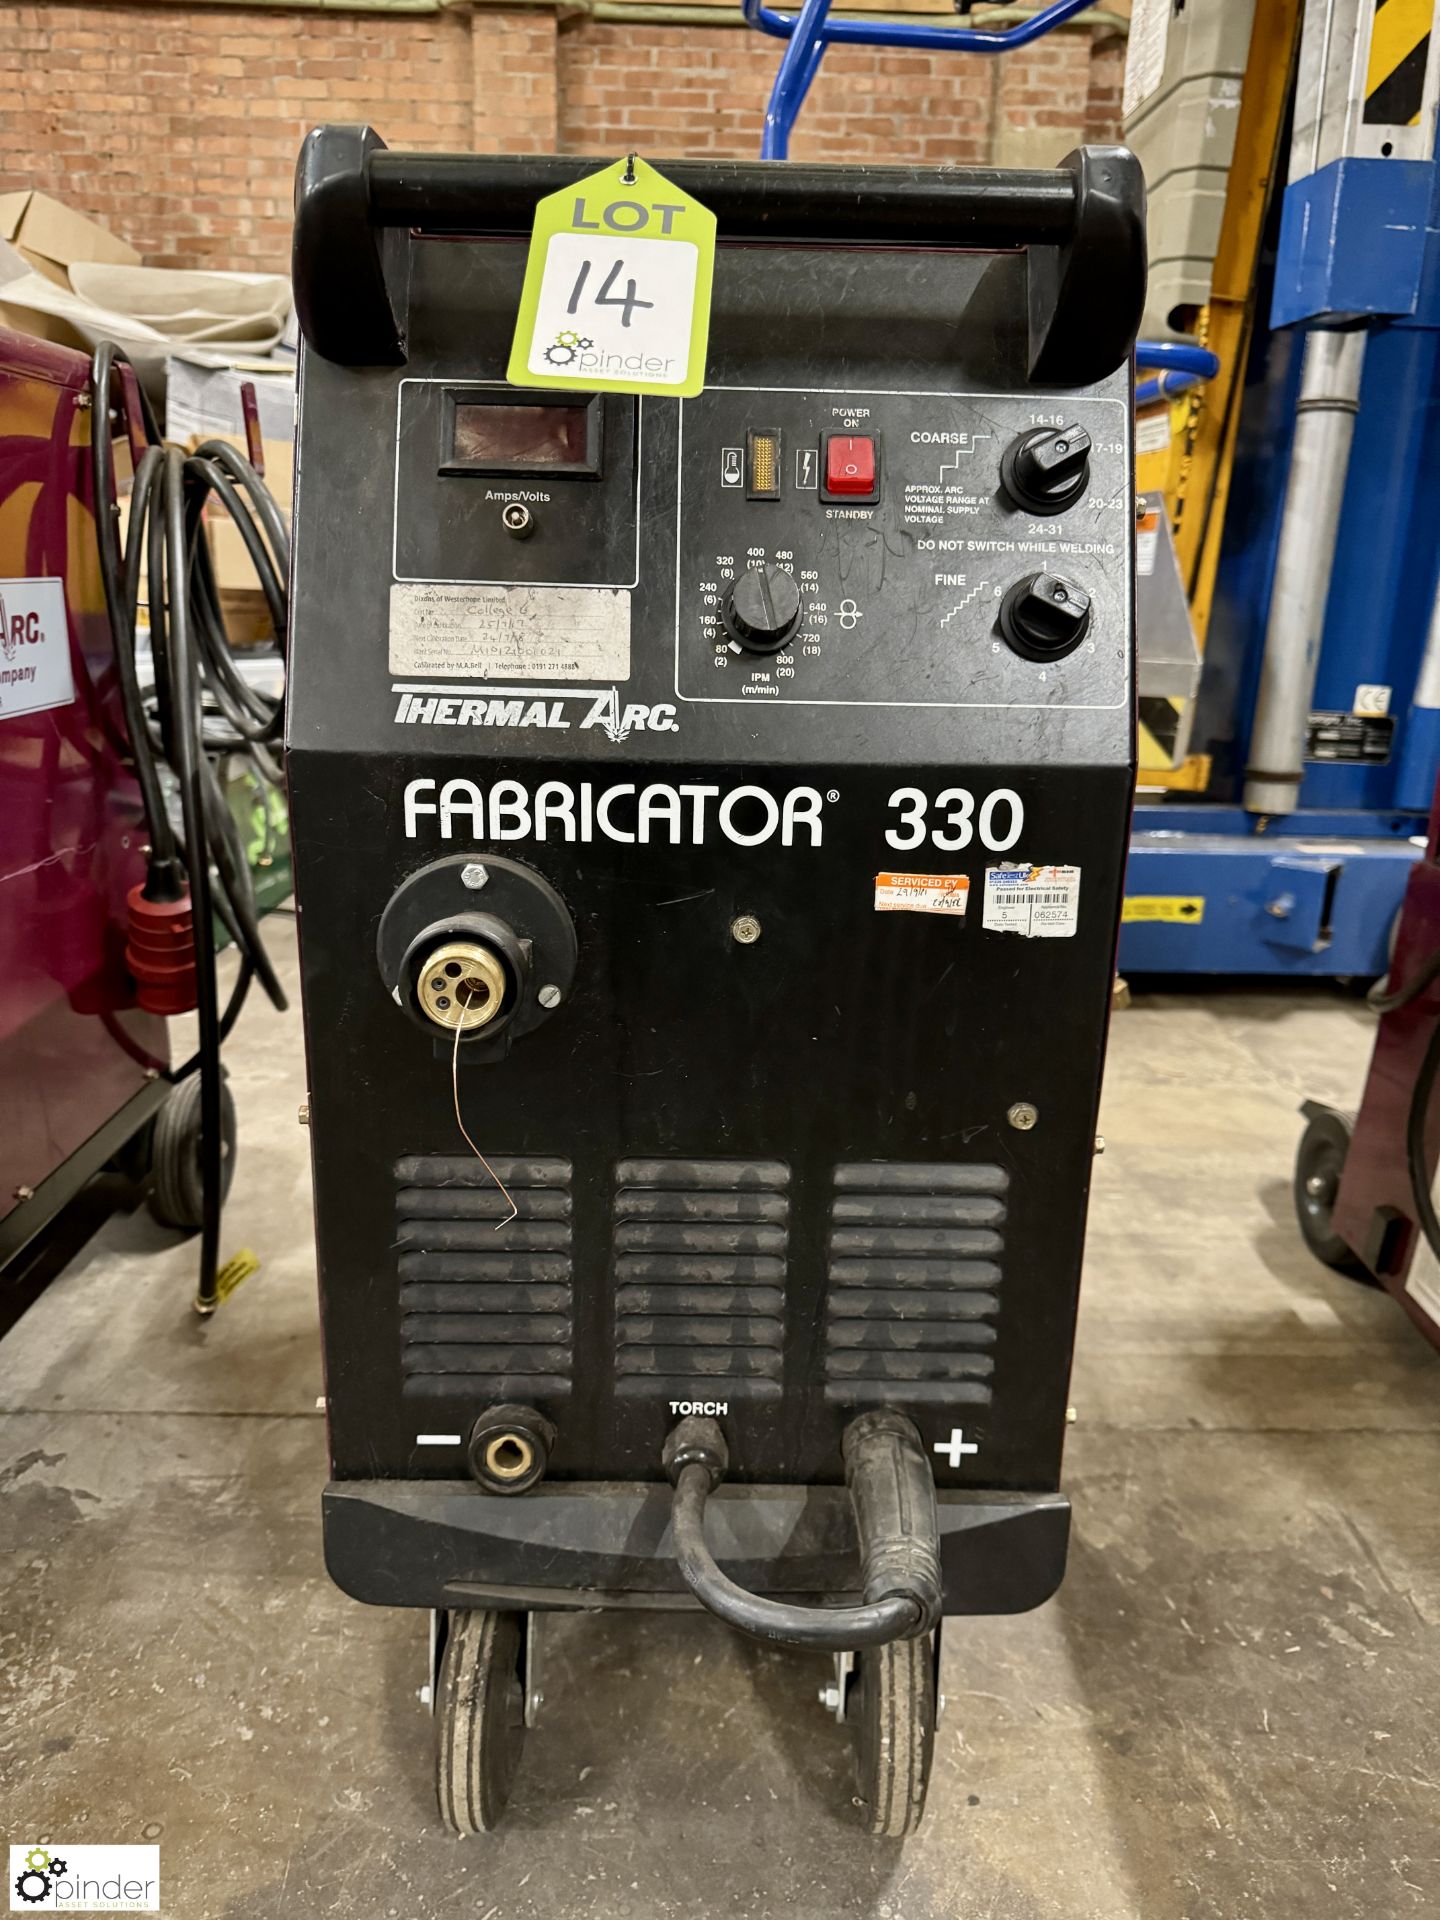 Thermal Arc Fabricator 330 Arc Welding Set, 300amp, 415volts - Image 2 of 4